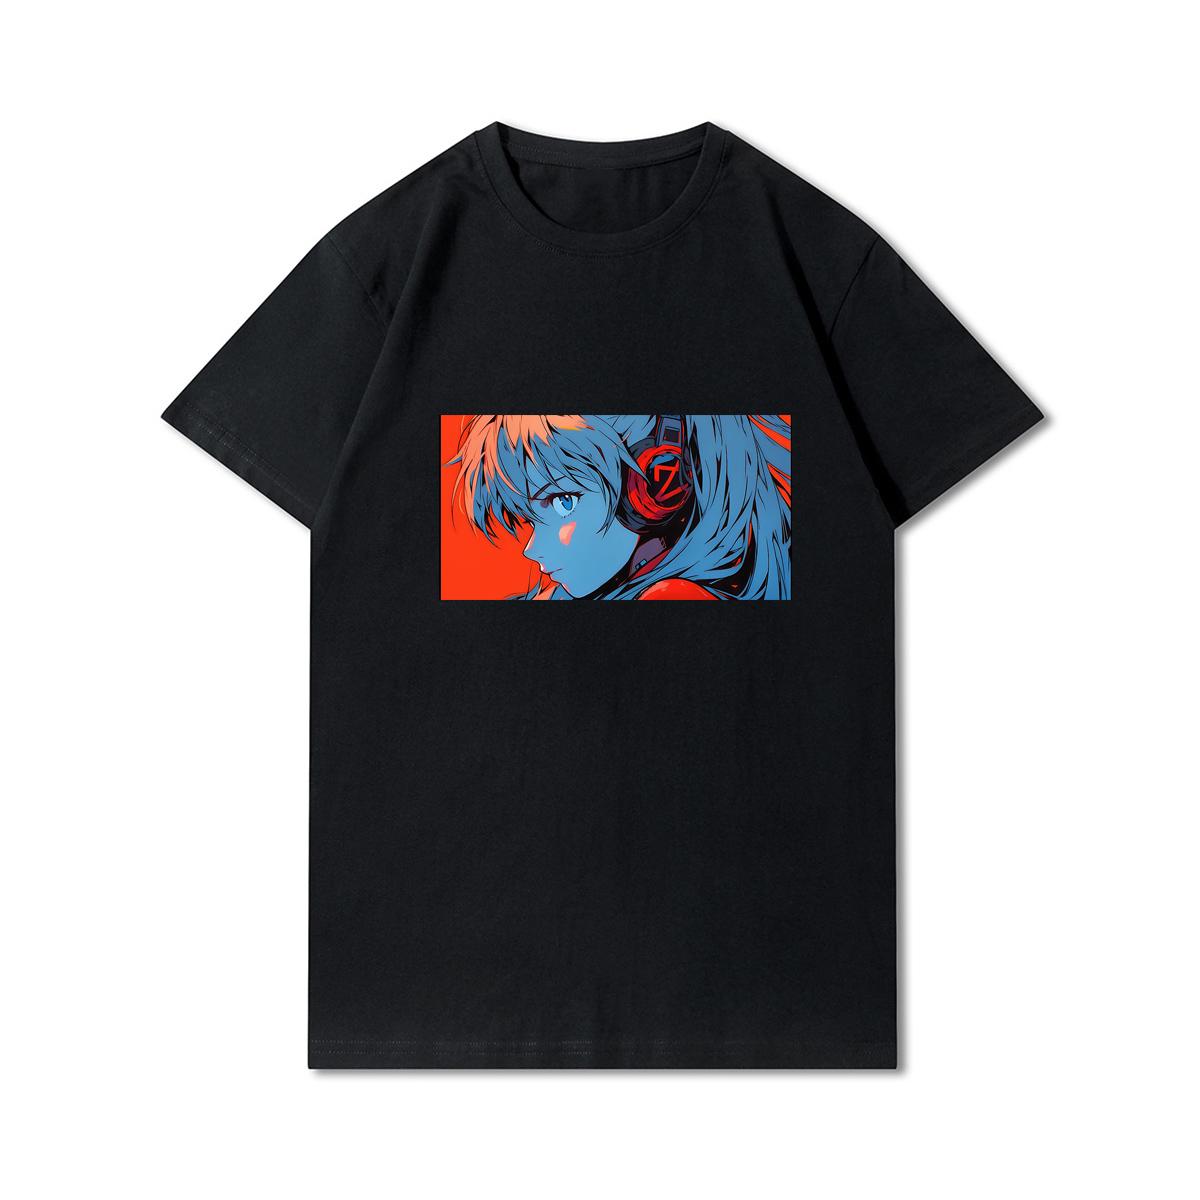 FT T Shirts Plus Size S-3XL Evangelion Printed Men T Shirts Round Neck Cotton Tops Summer Anime Casual Black Tees